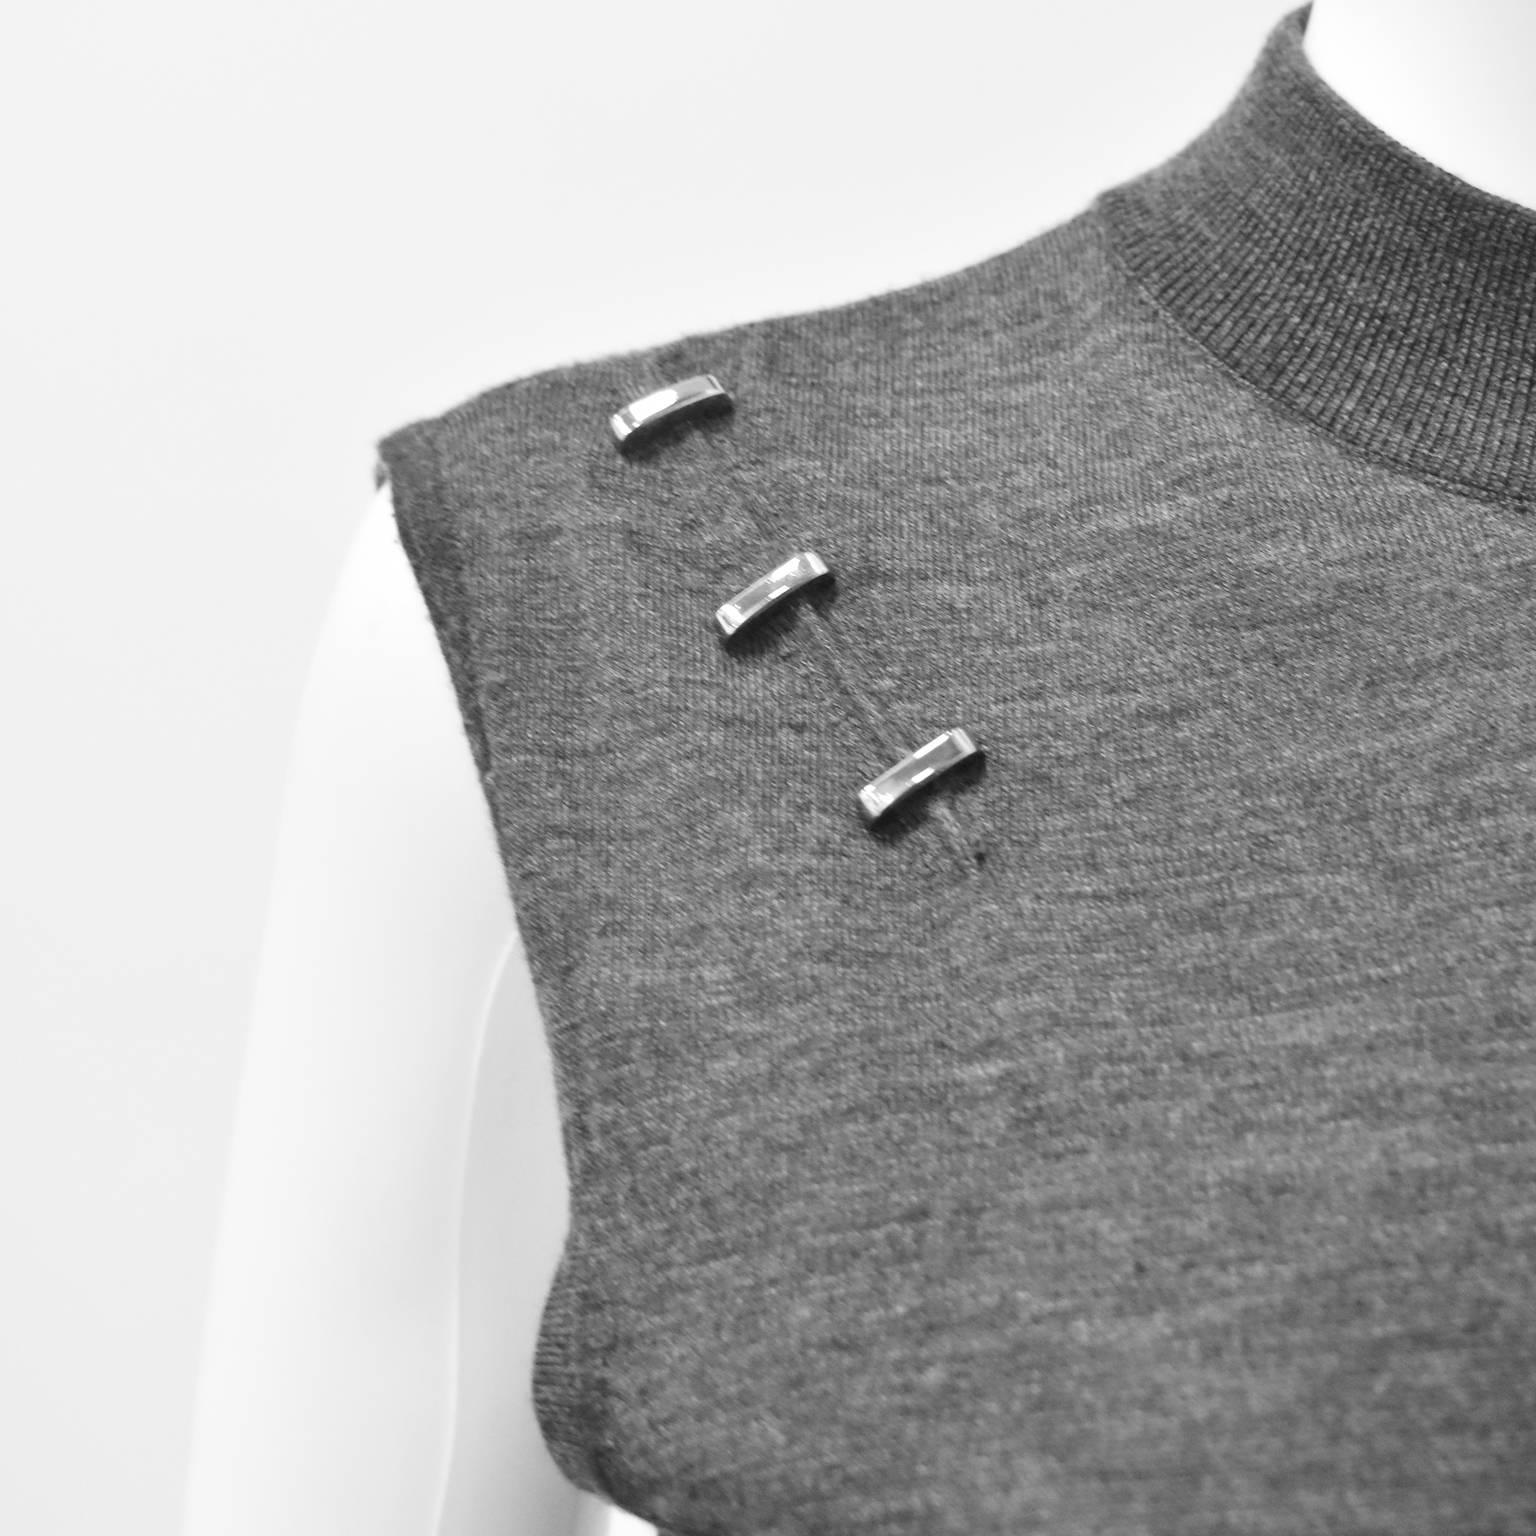 A grey knit vest top from Paco Rabanne. The top is a simple sleeveless design with wide arm holes and a high neck with a ribbed finish along the opening. The top also features silver hardware details creating a line from the shoulder down towards